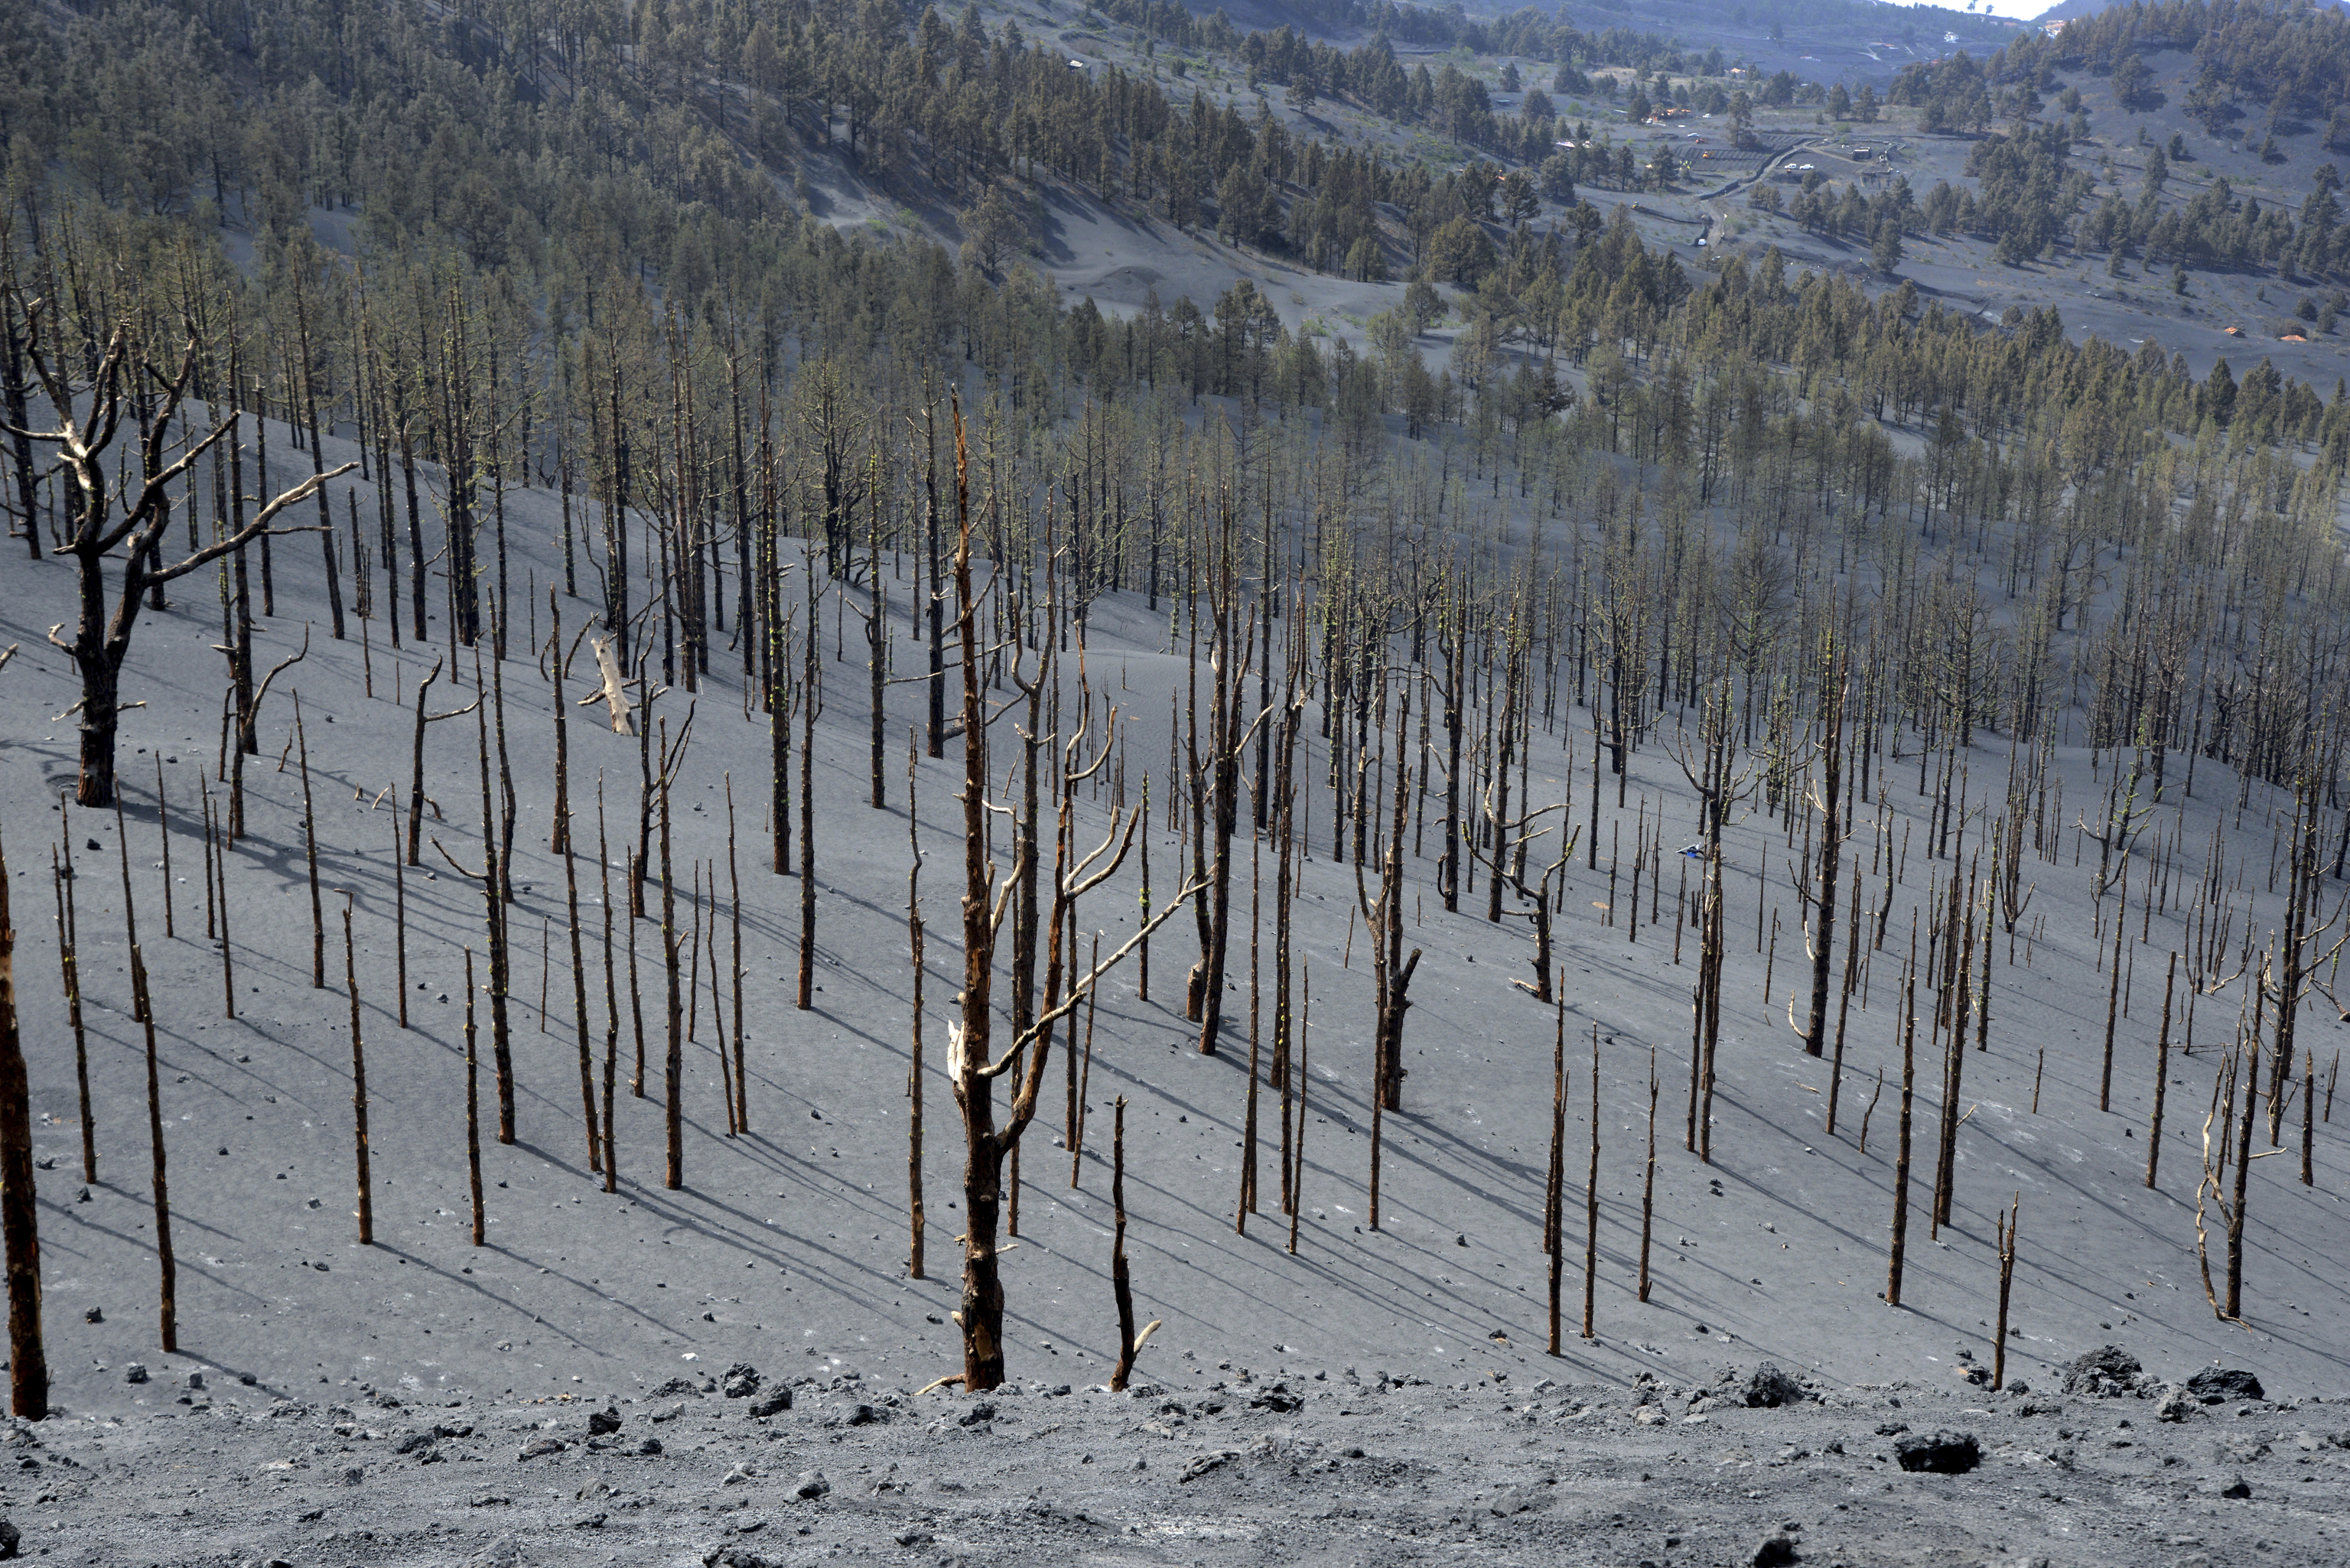 Canarian pine forest in the Cambre Vieja region affected by the explosion